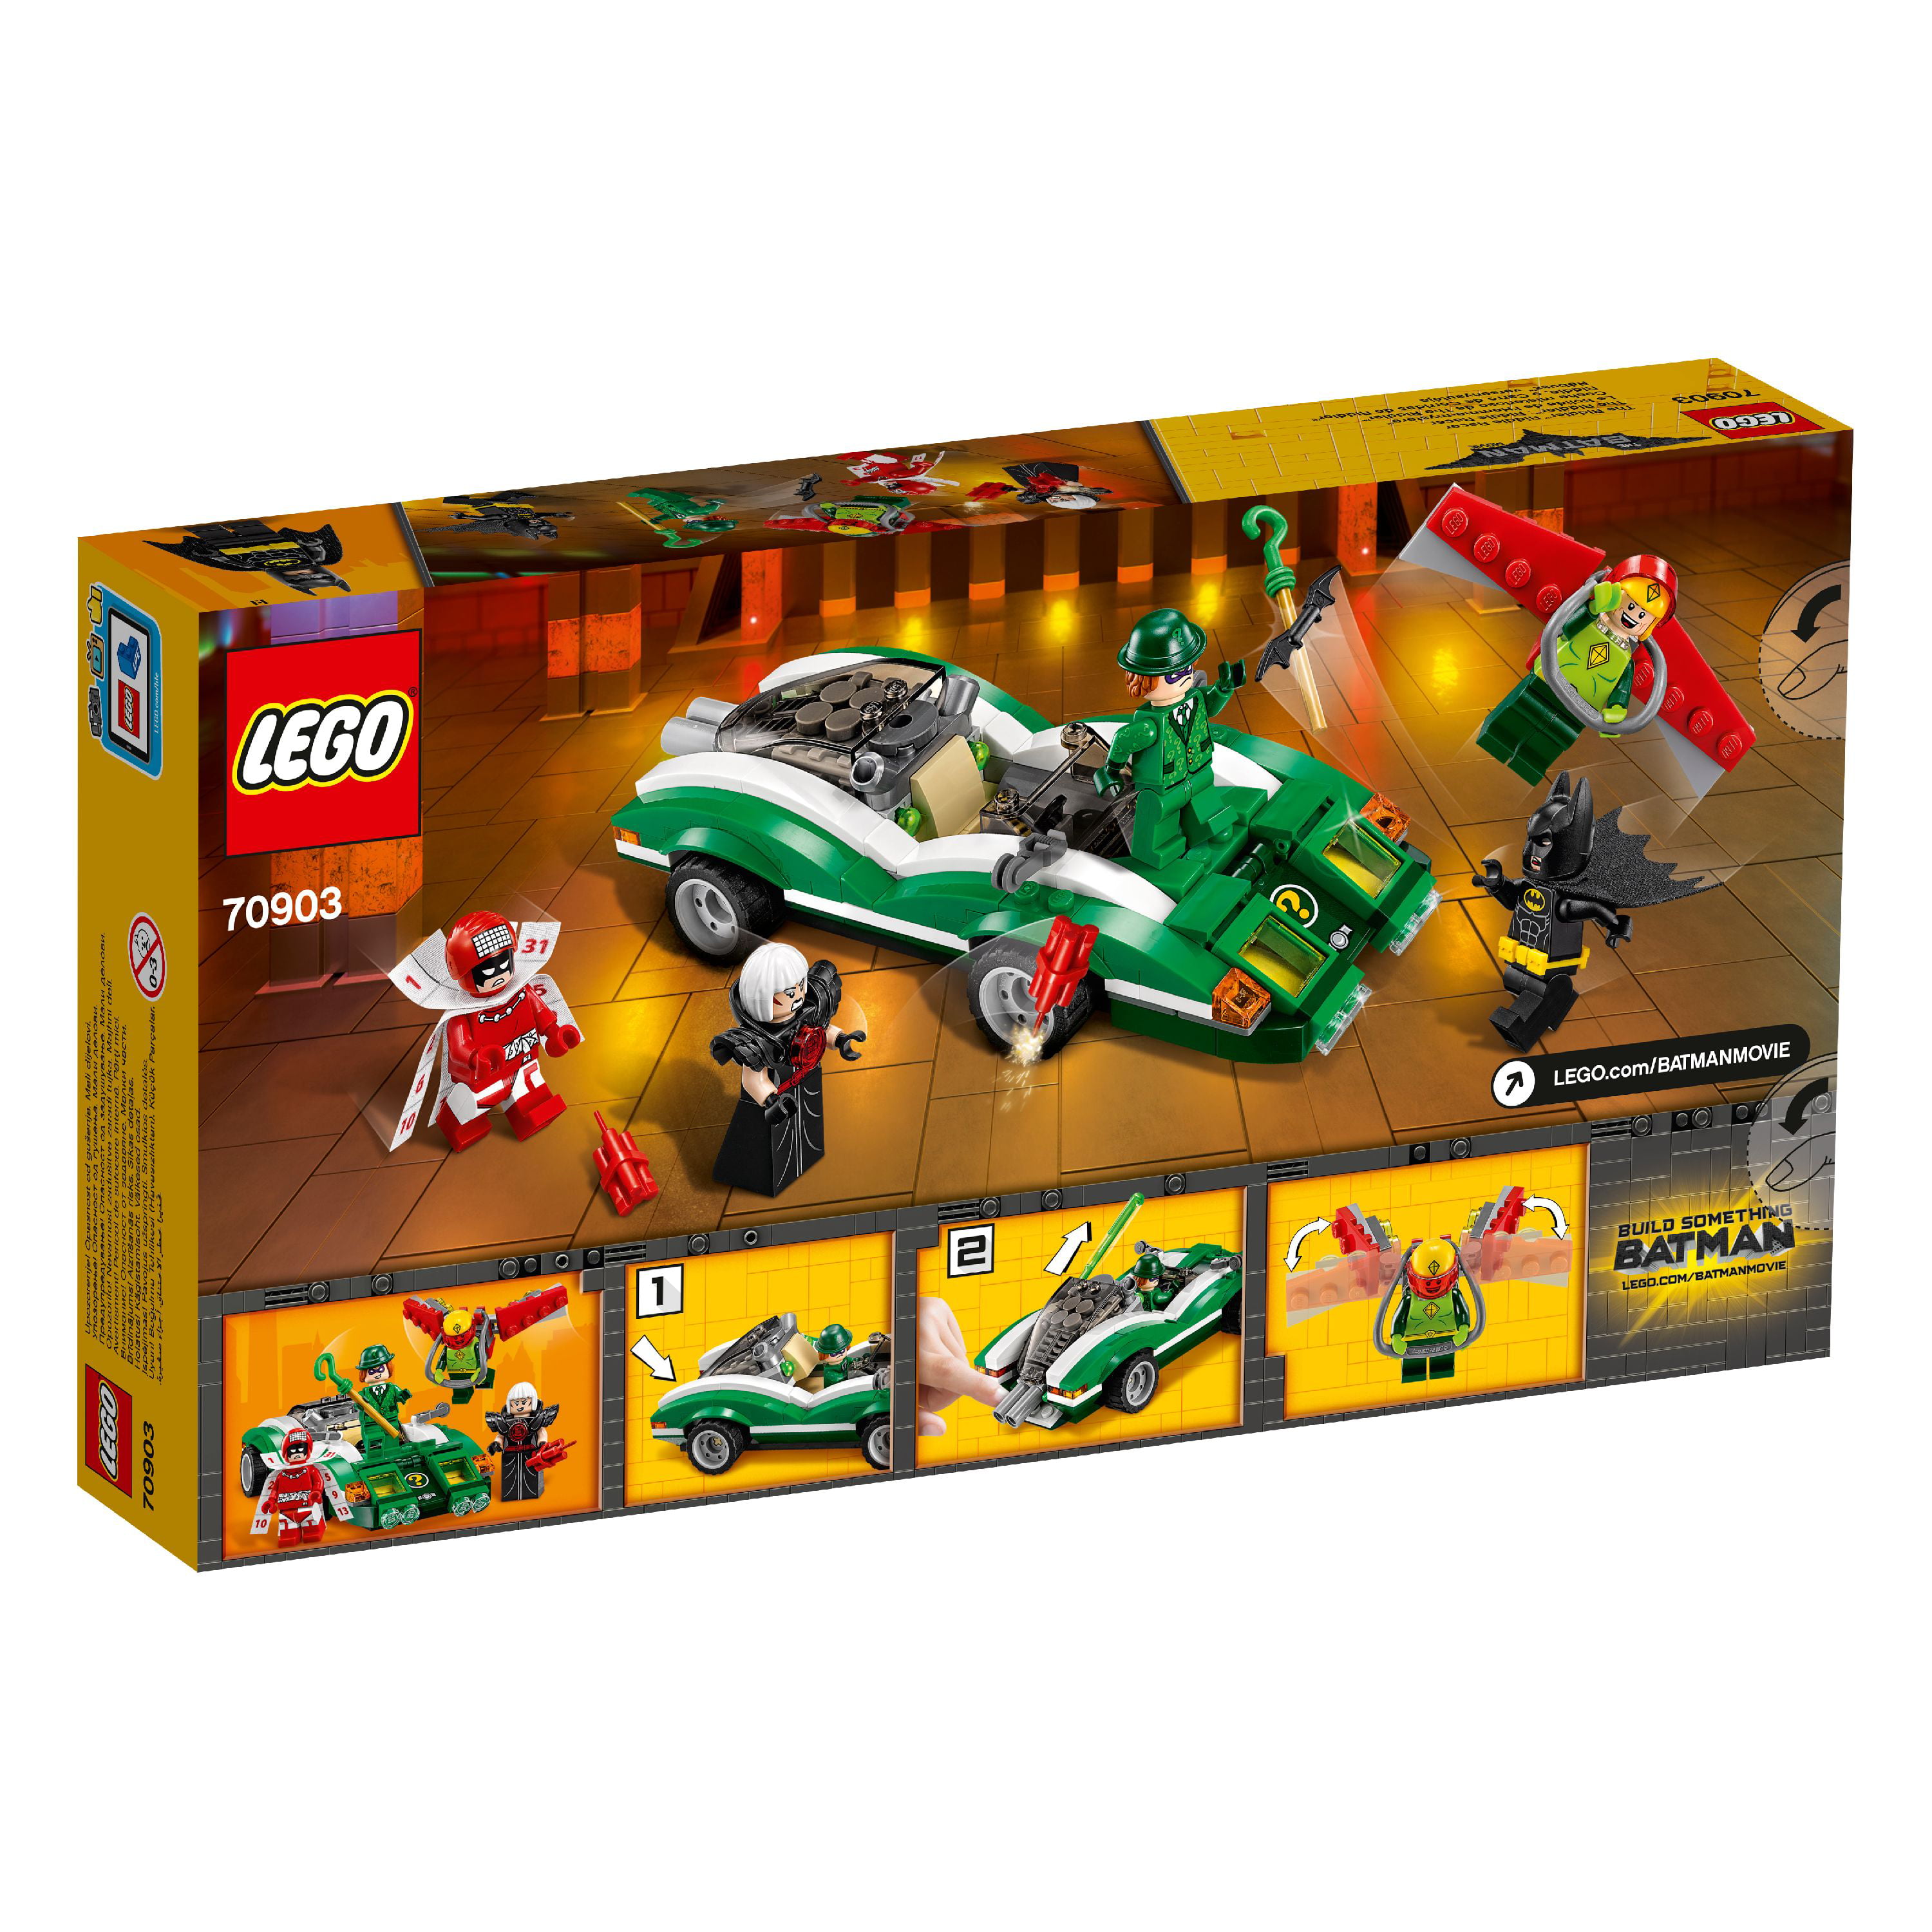 The Lego Batman Movie The Riddler Riddle Racer 70903 NEW FREE Signed Delivery 